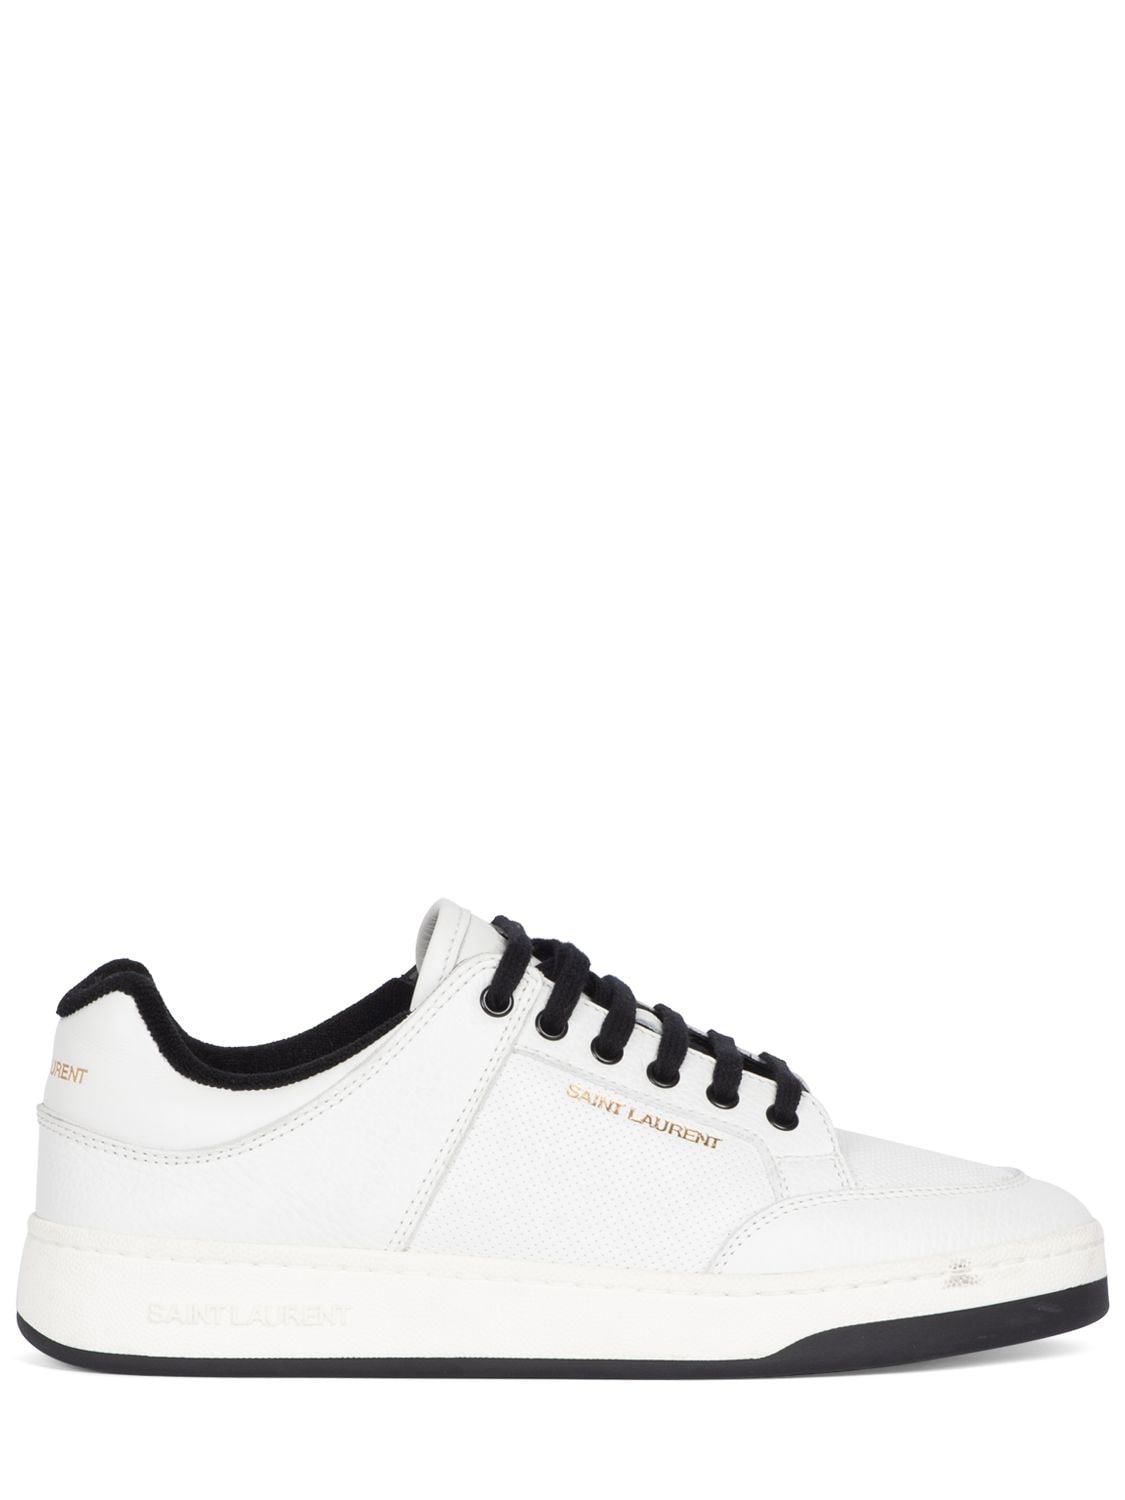 Image of Sl/61 Leather Sneakers